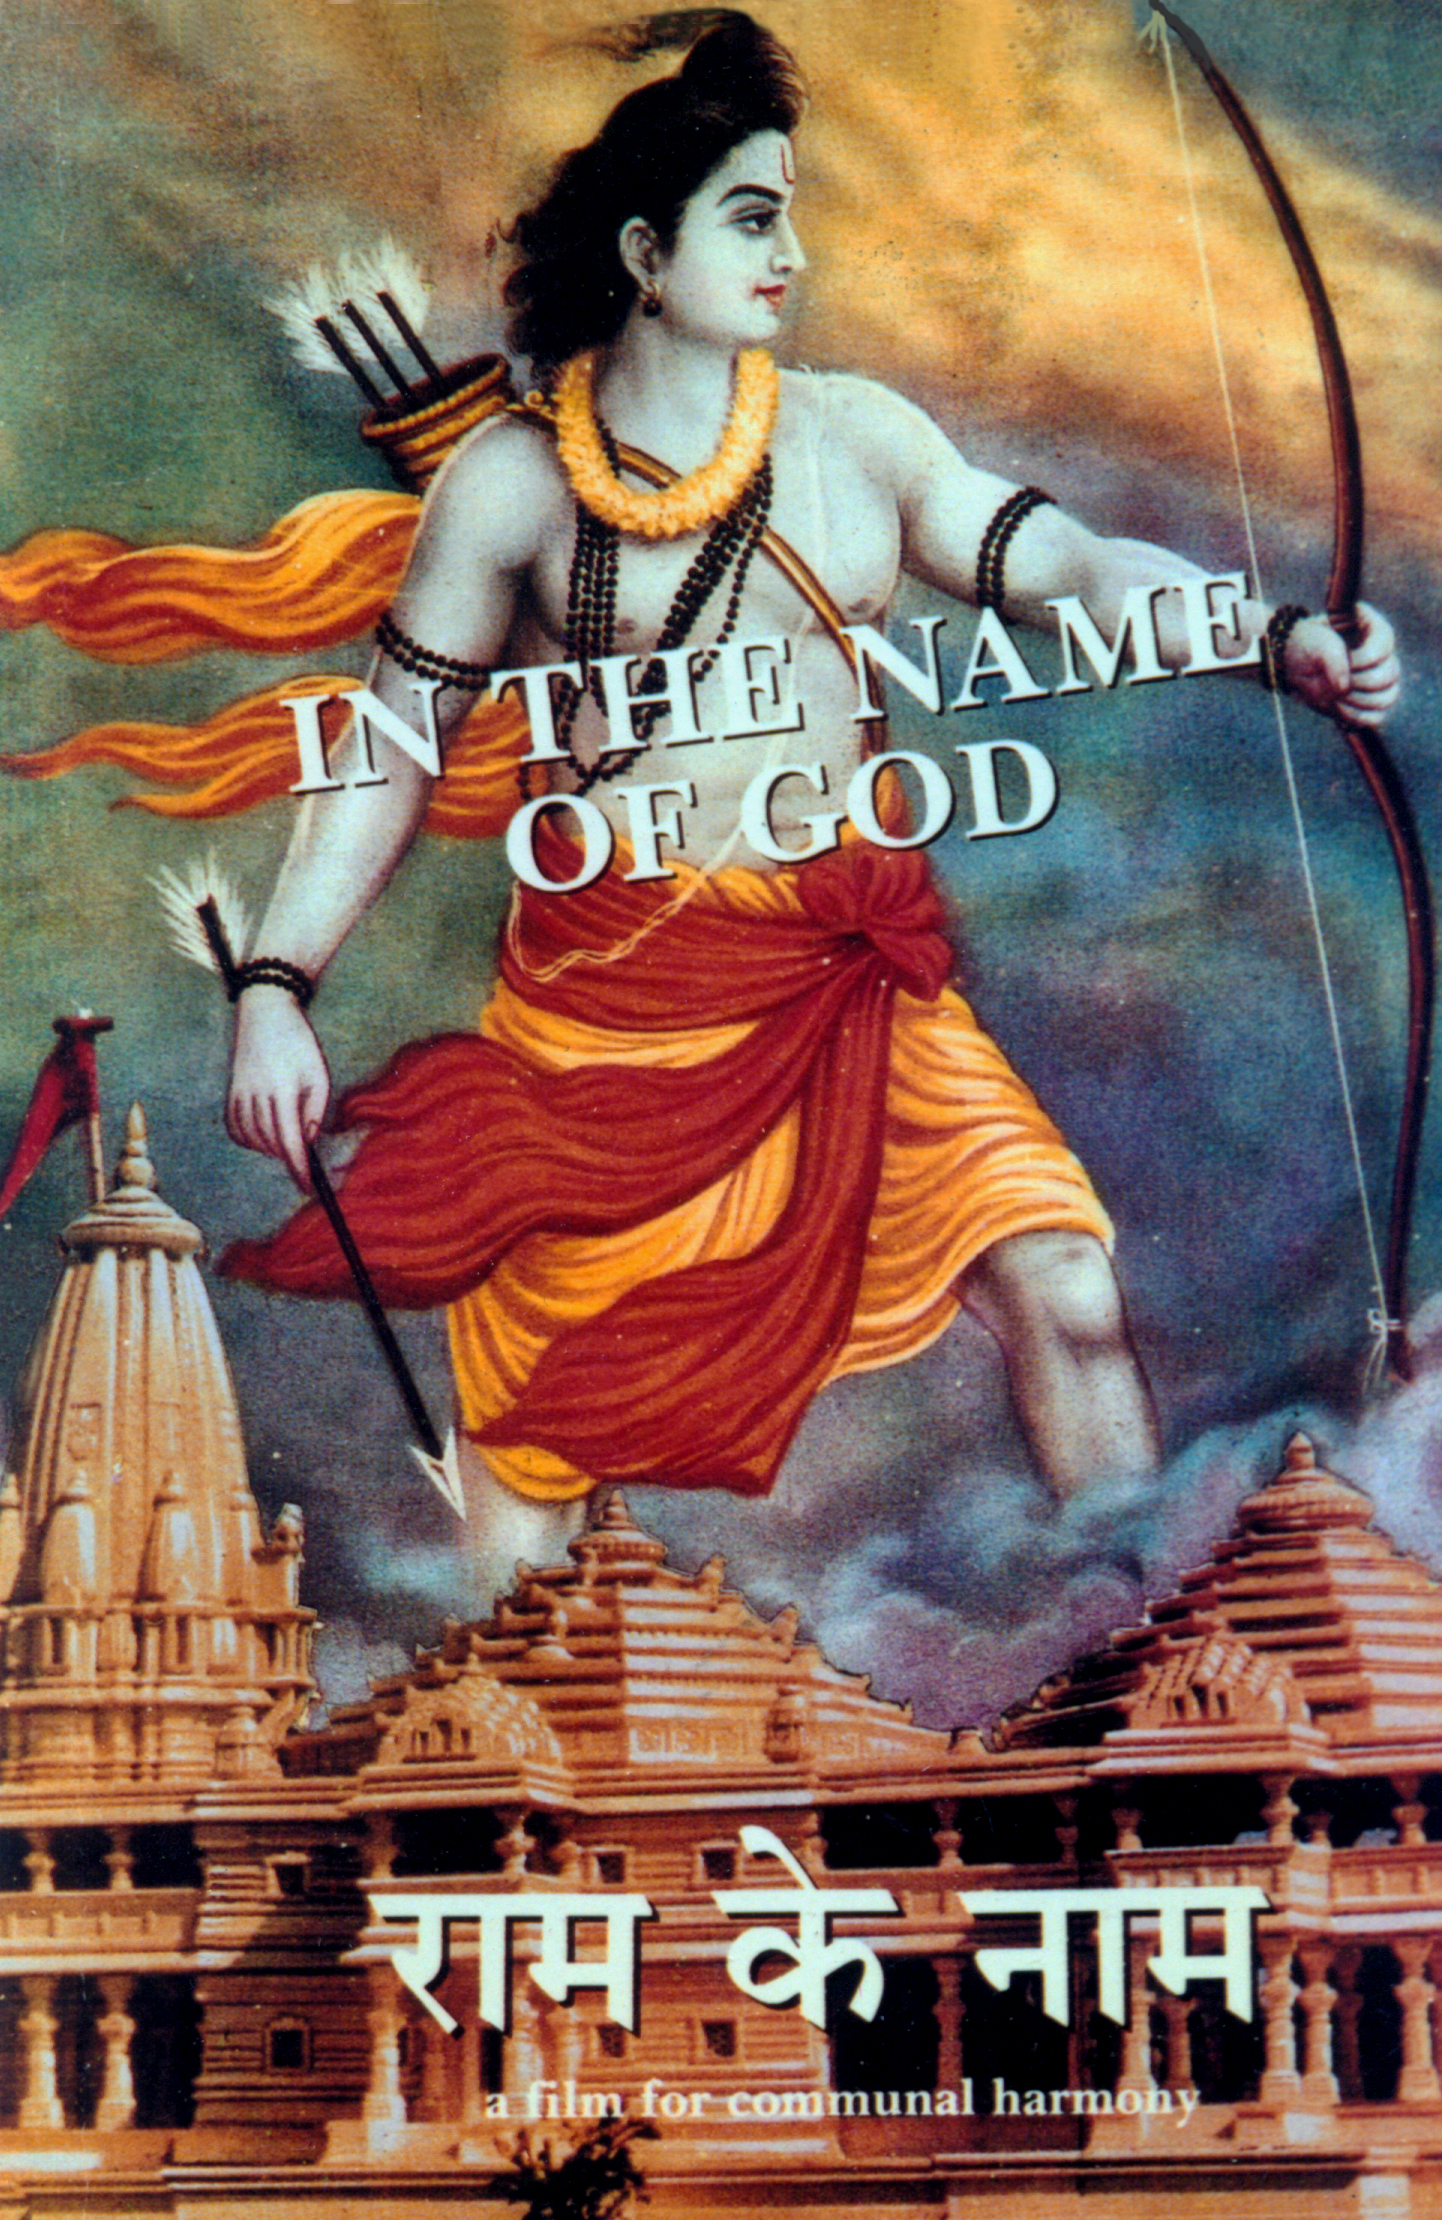 Poster for Anand Patwardhan's 'Ram Ke Naam' ('In the Name of God', 1992). Courtesy of Anand Patwardhan.